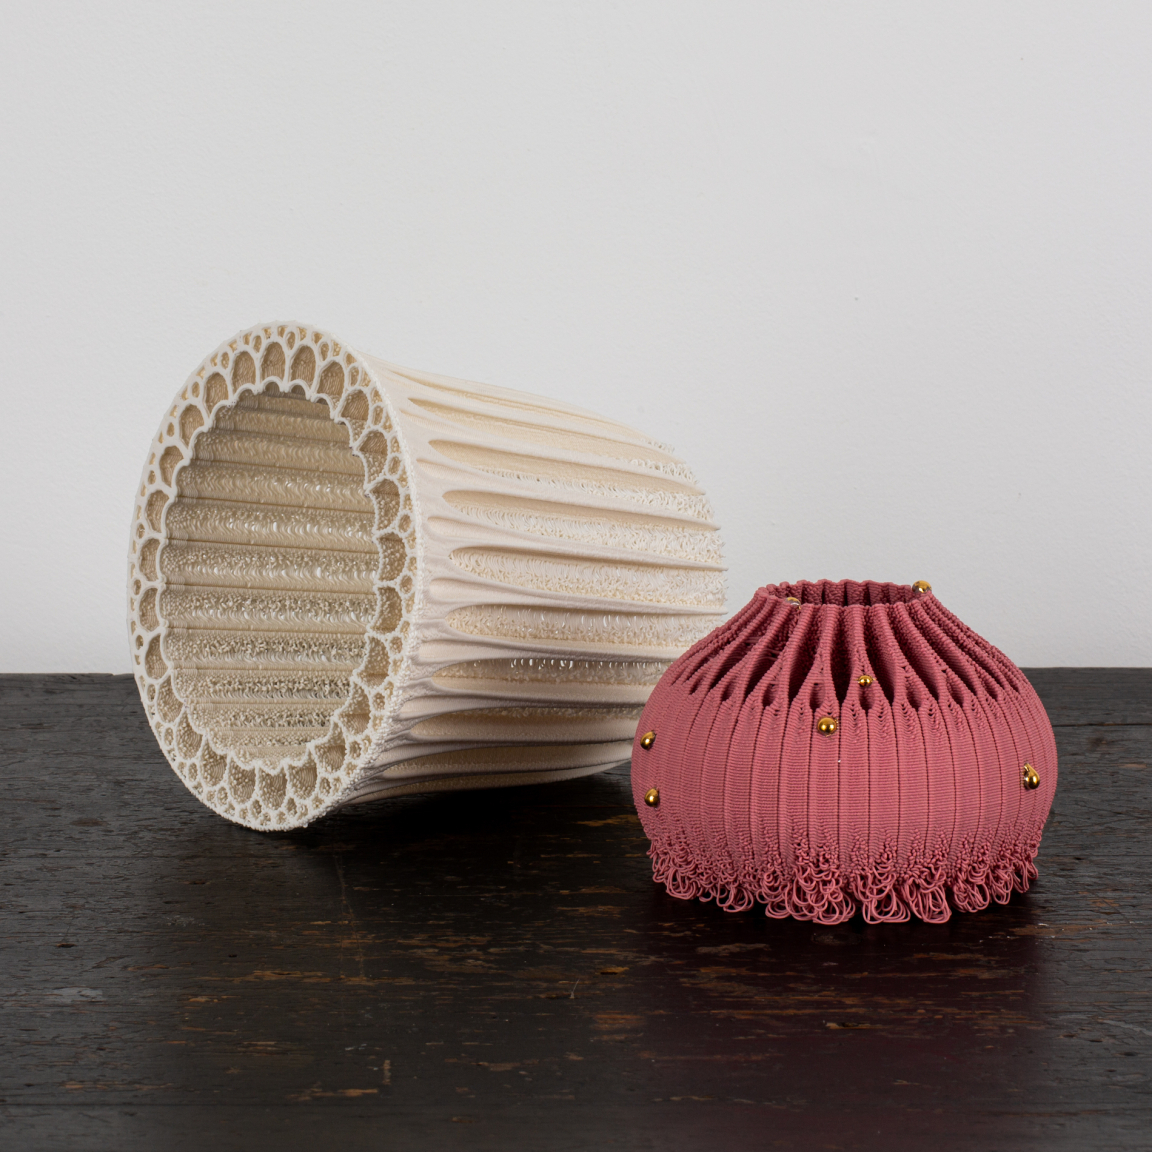 Nico Conti - collar vessel, white porcelain and sea urchin with gold and pink porcelain, 3D printed